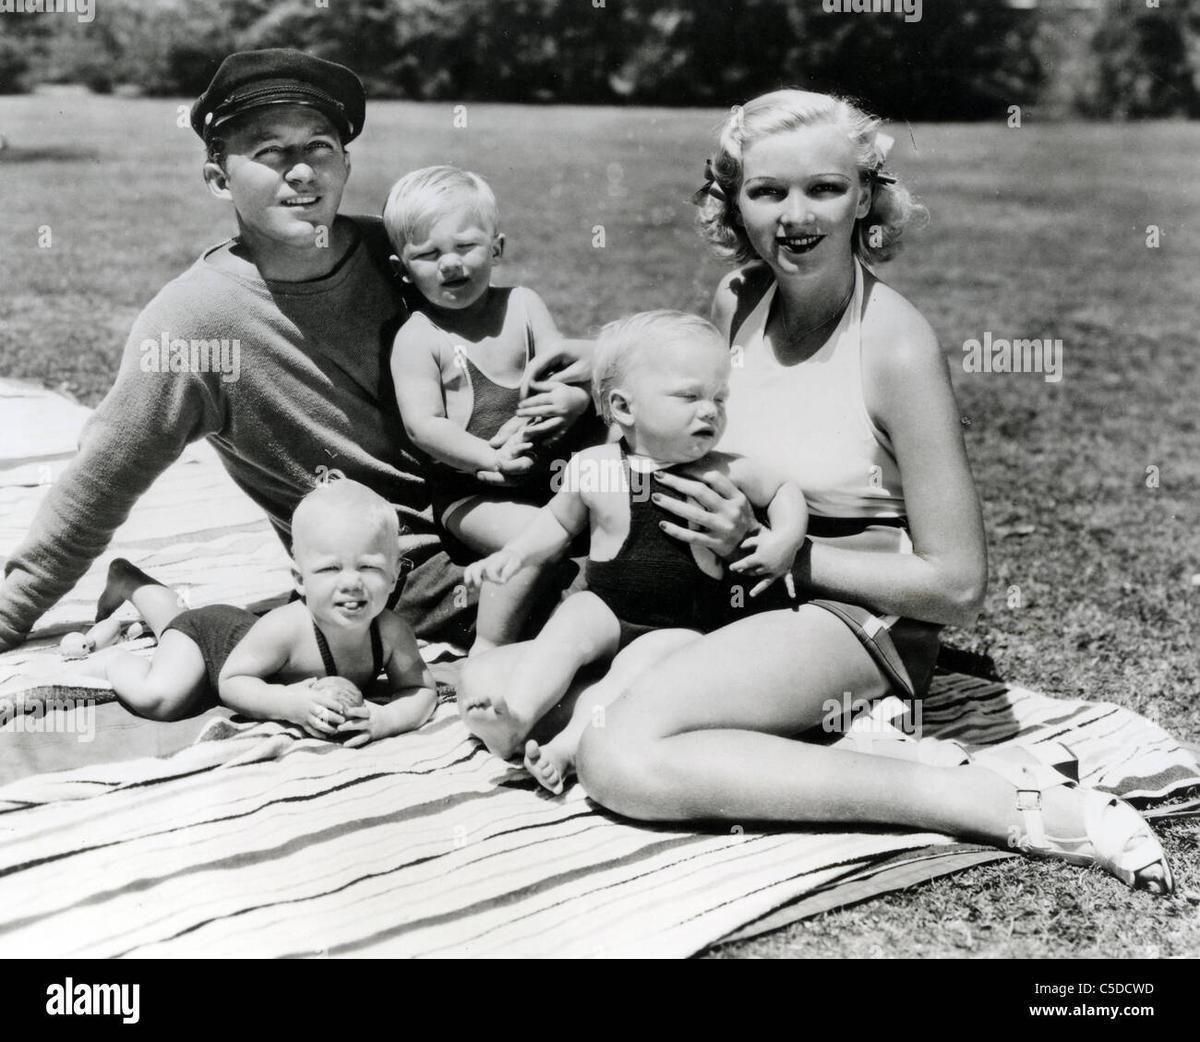 bing crosby with first wife dixie lee and their children C5DCWD